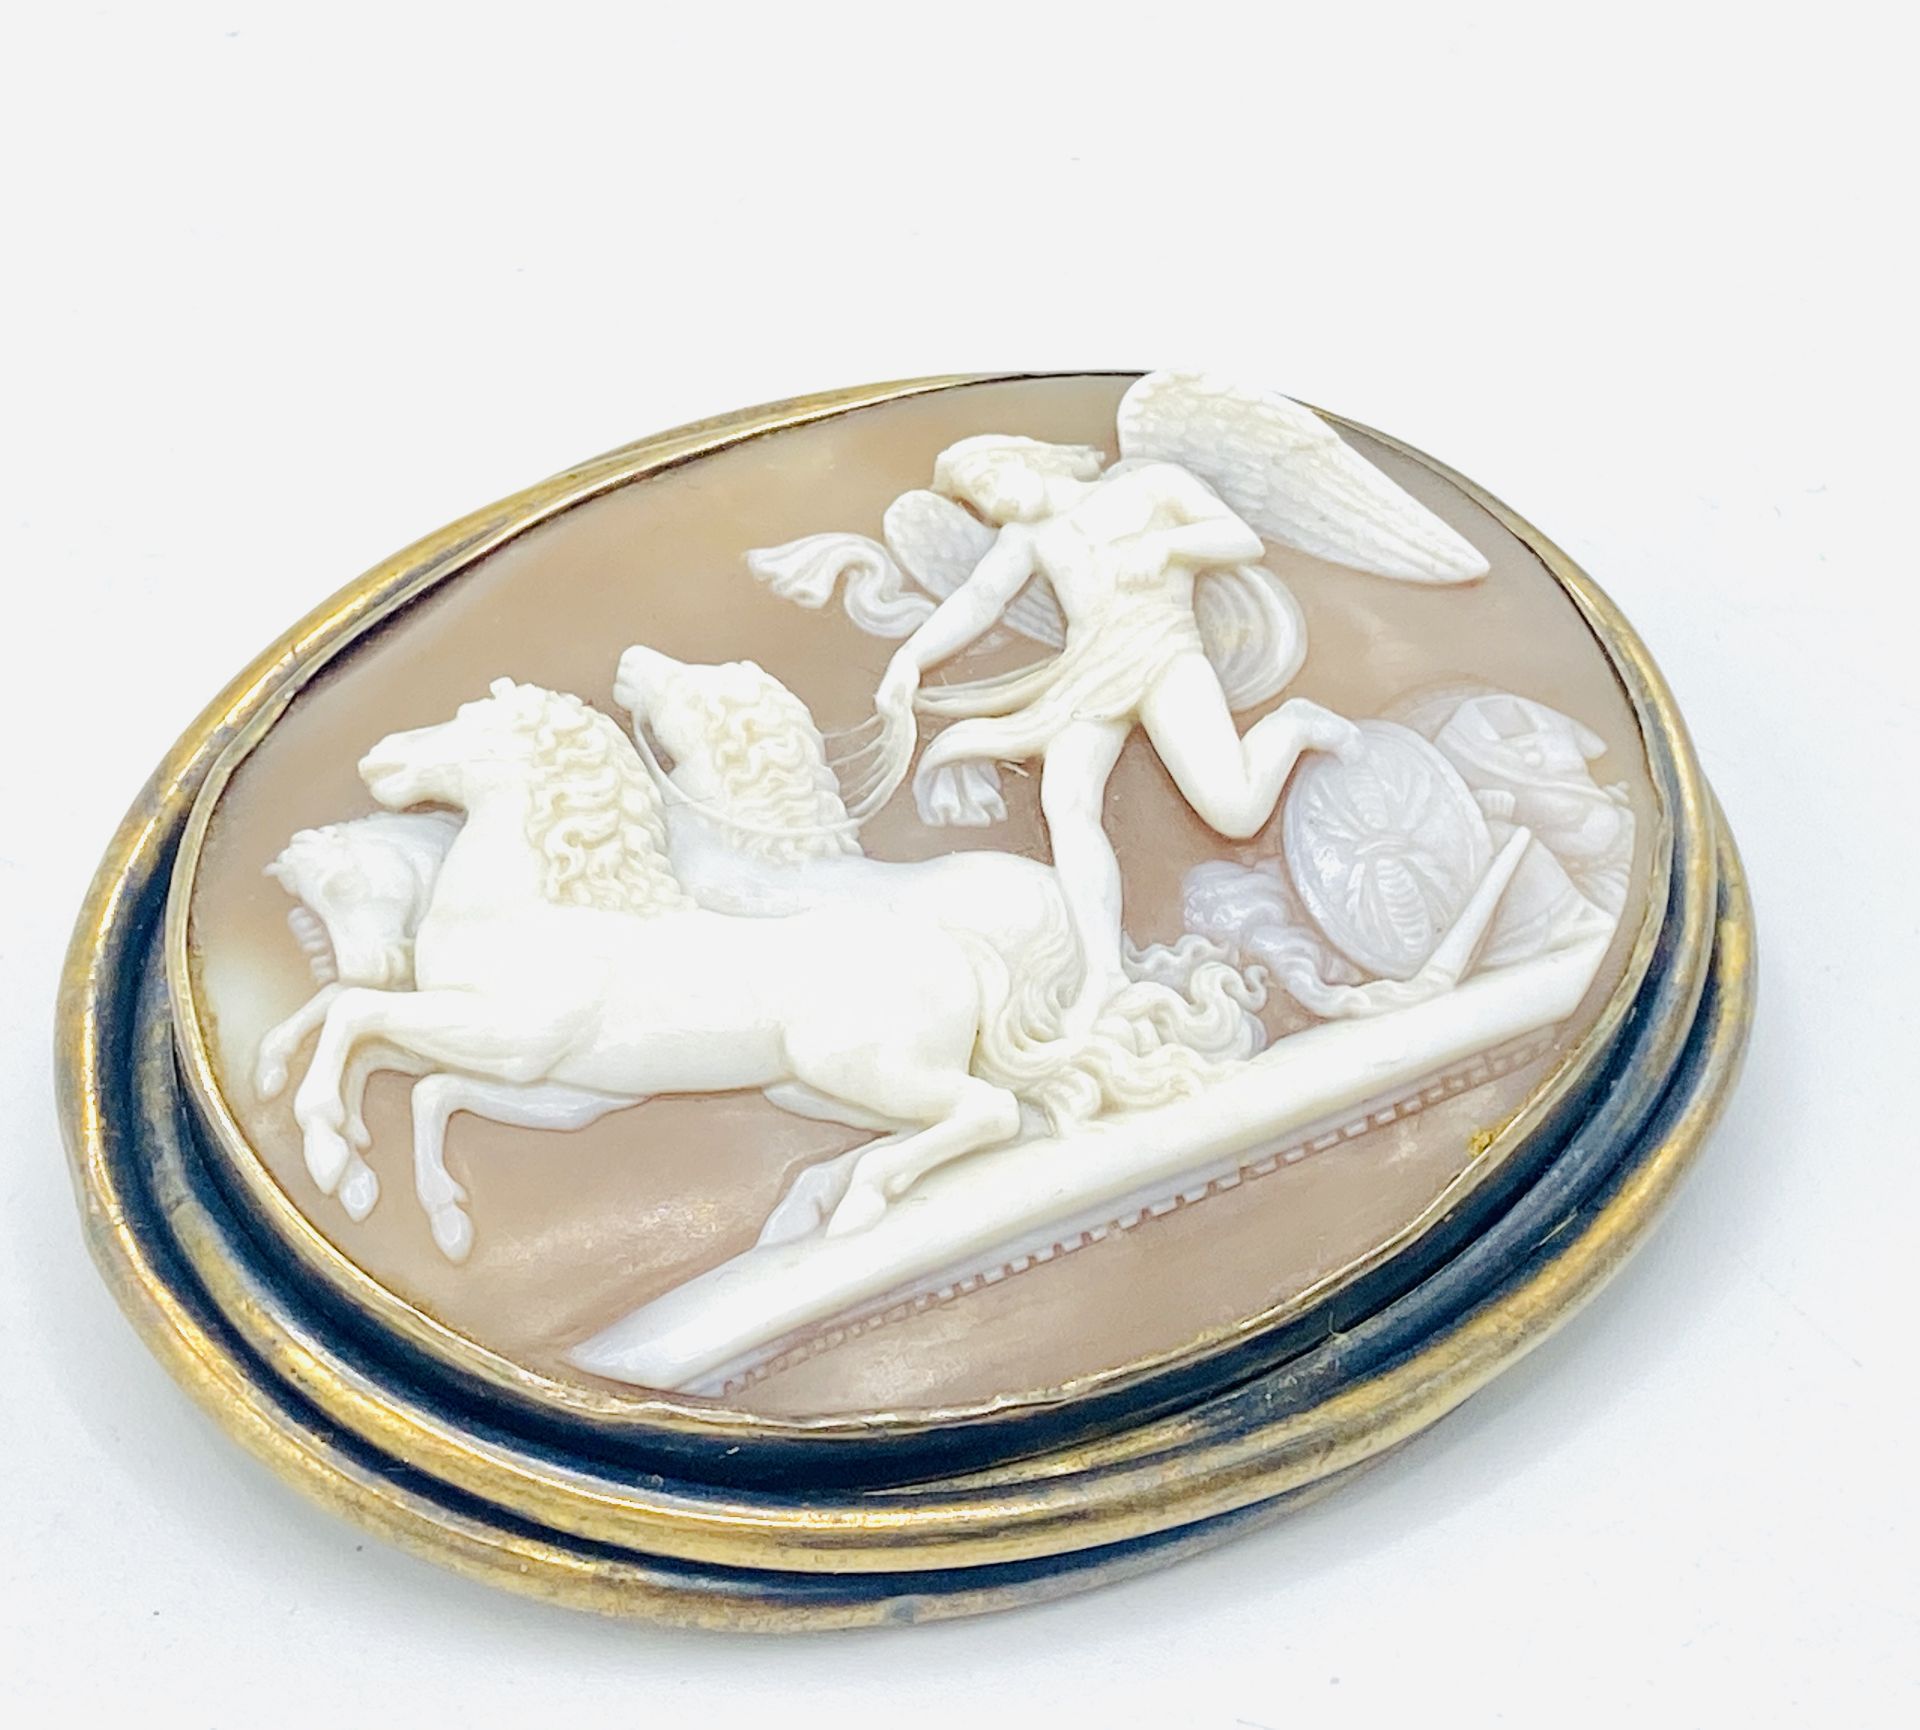 15ct gold cameo brooch - Image 3 of 4